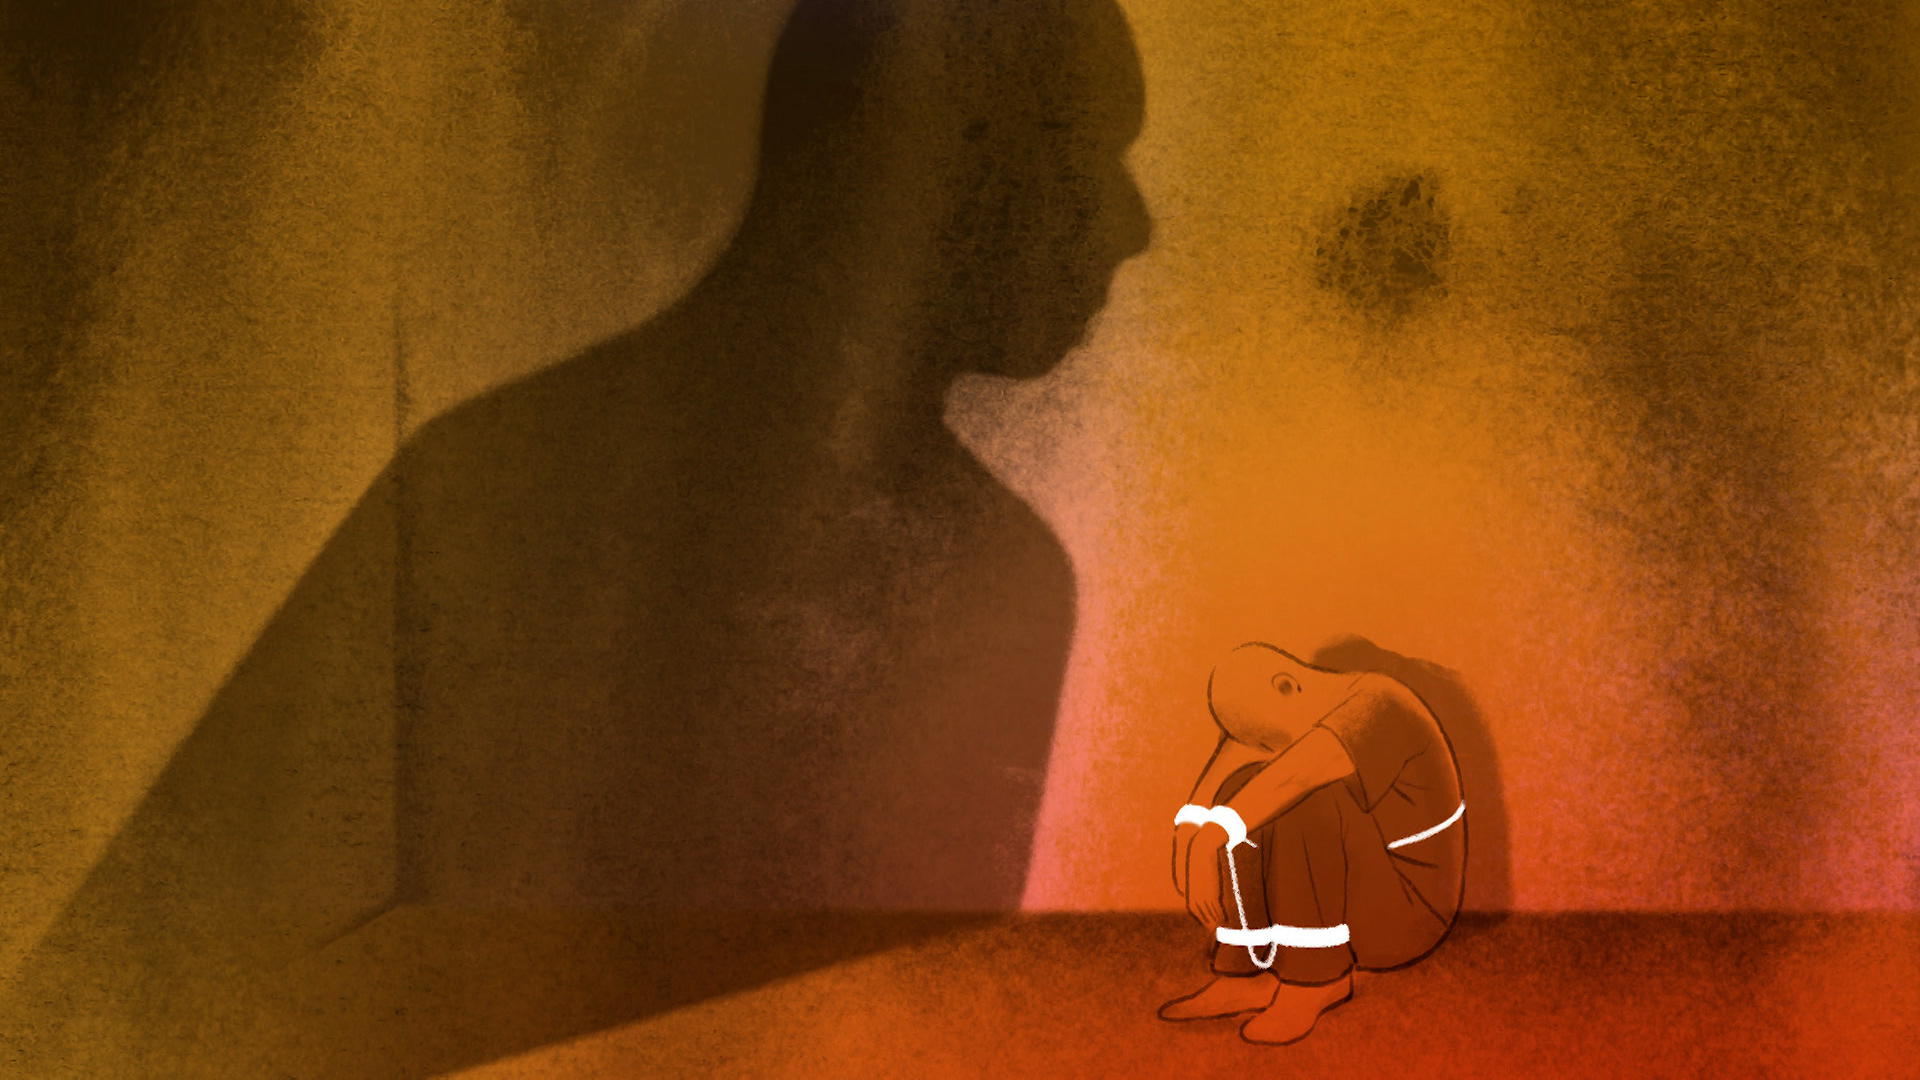 This is an illustration of a chained man sulking in a corner of the room with another person's shadow overlooking them.